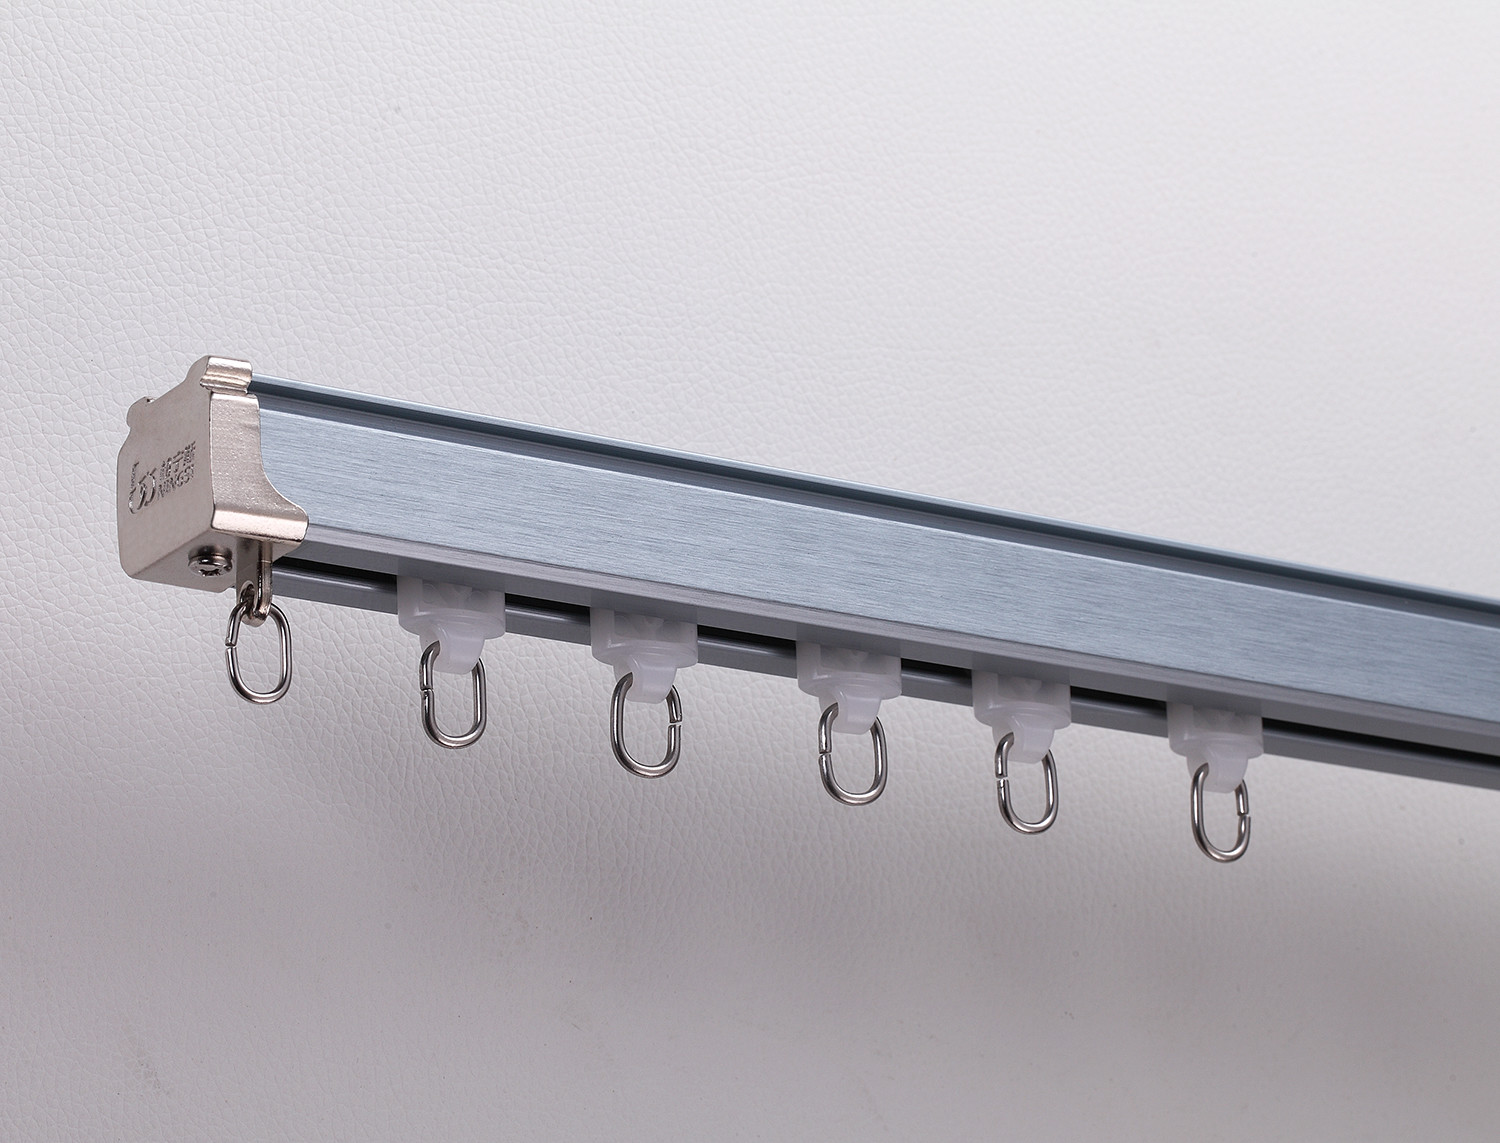 EP Surface Ceiling Mounted Curtain Rail Track System